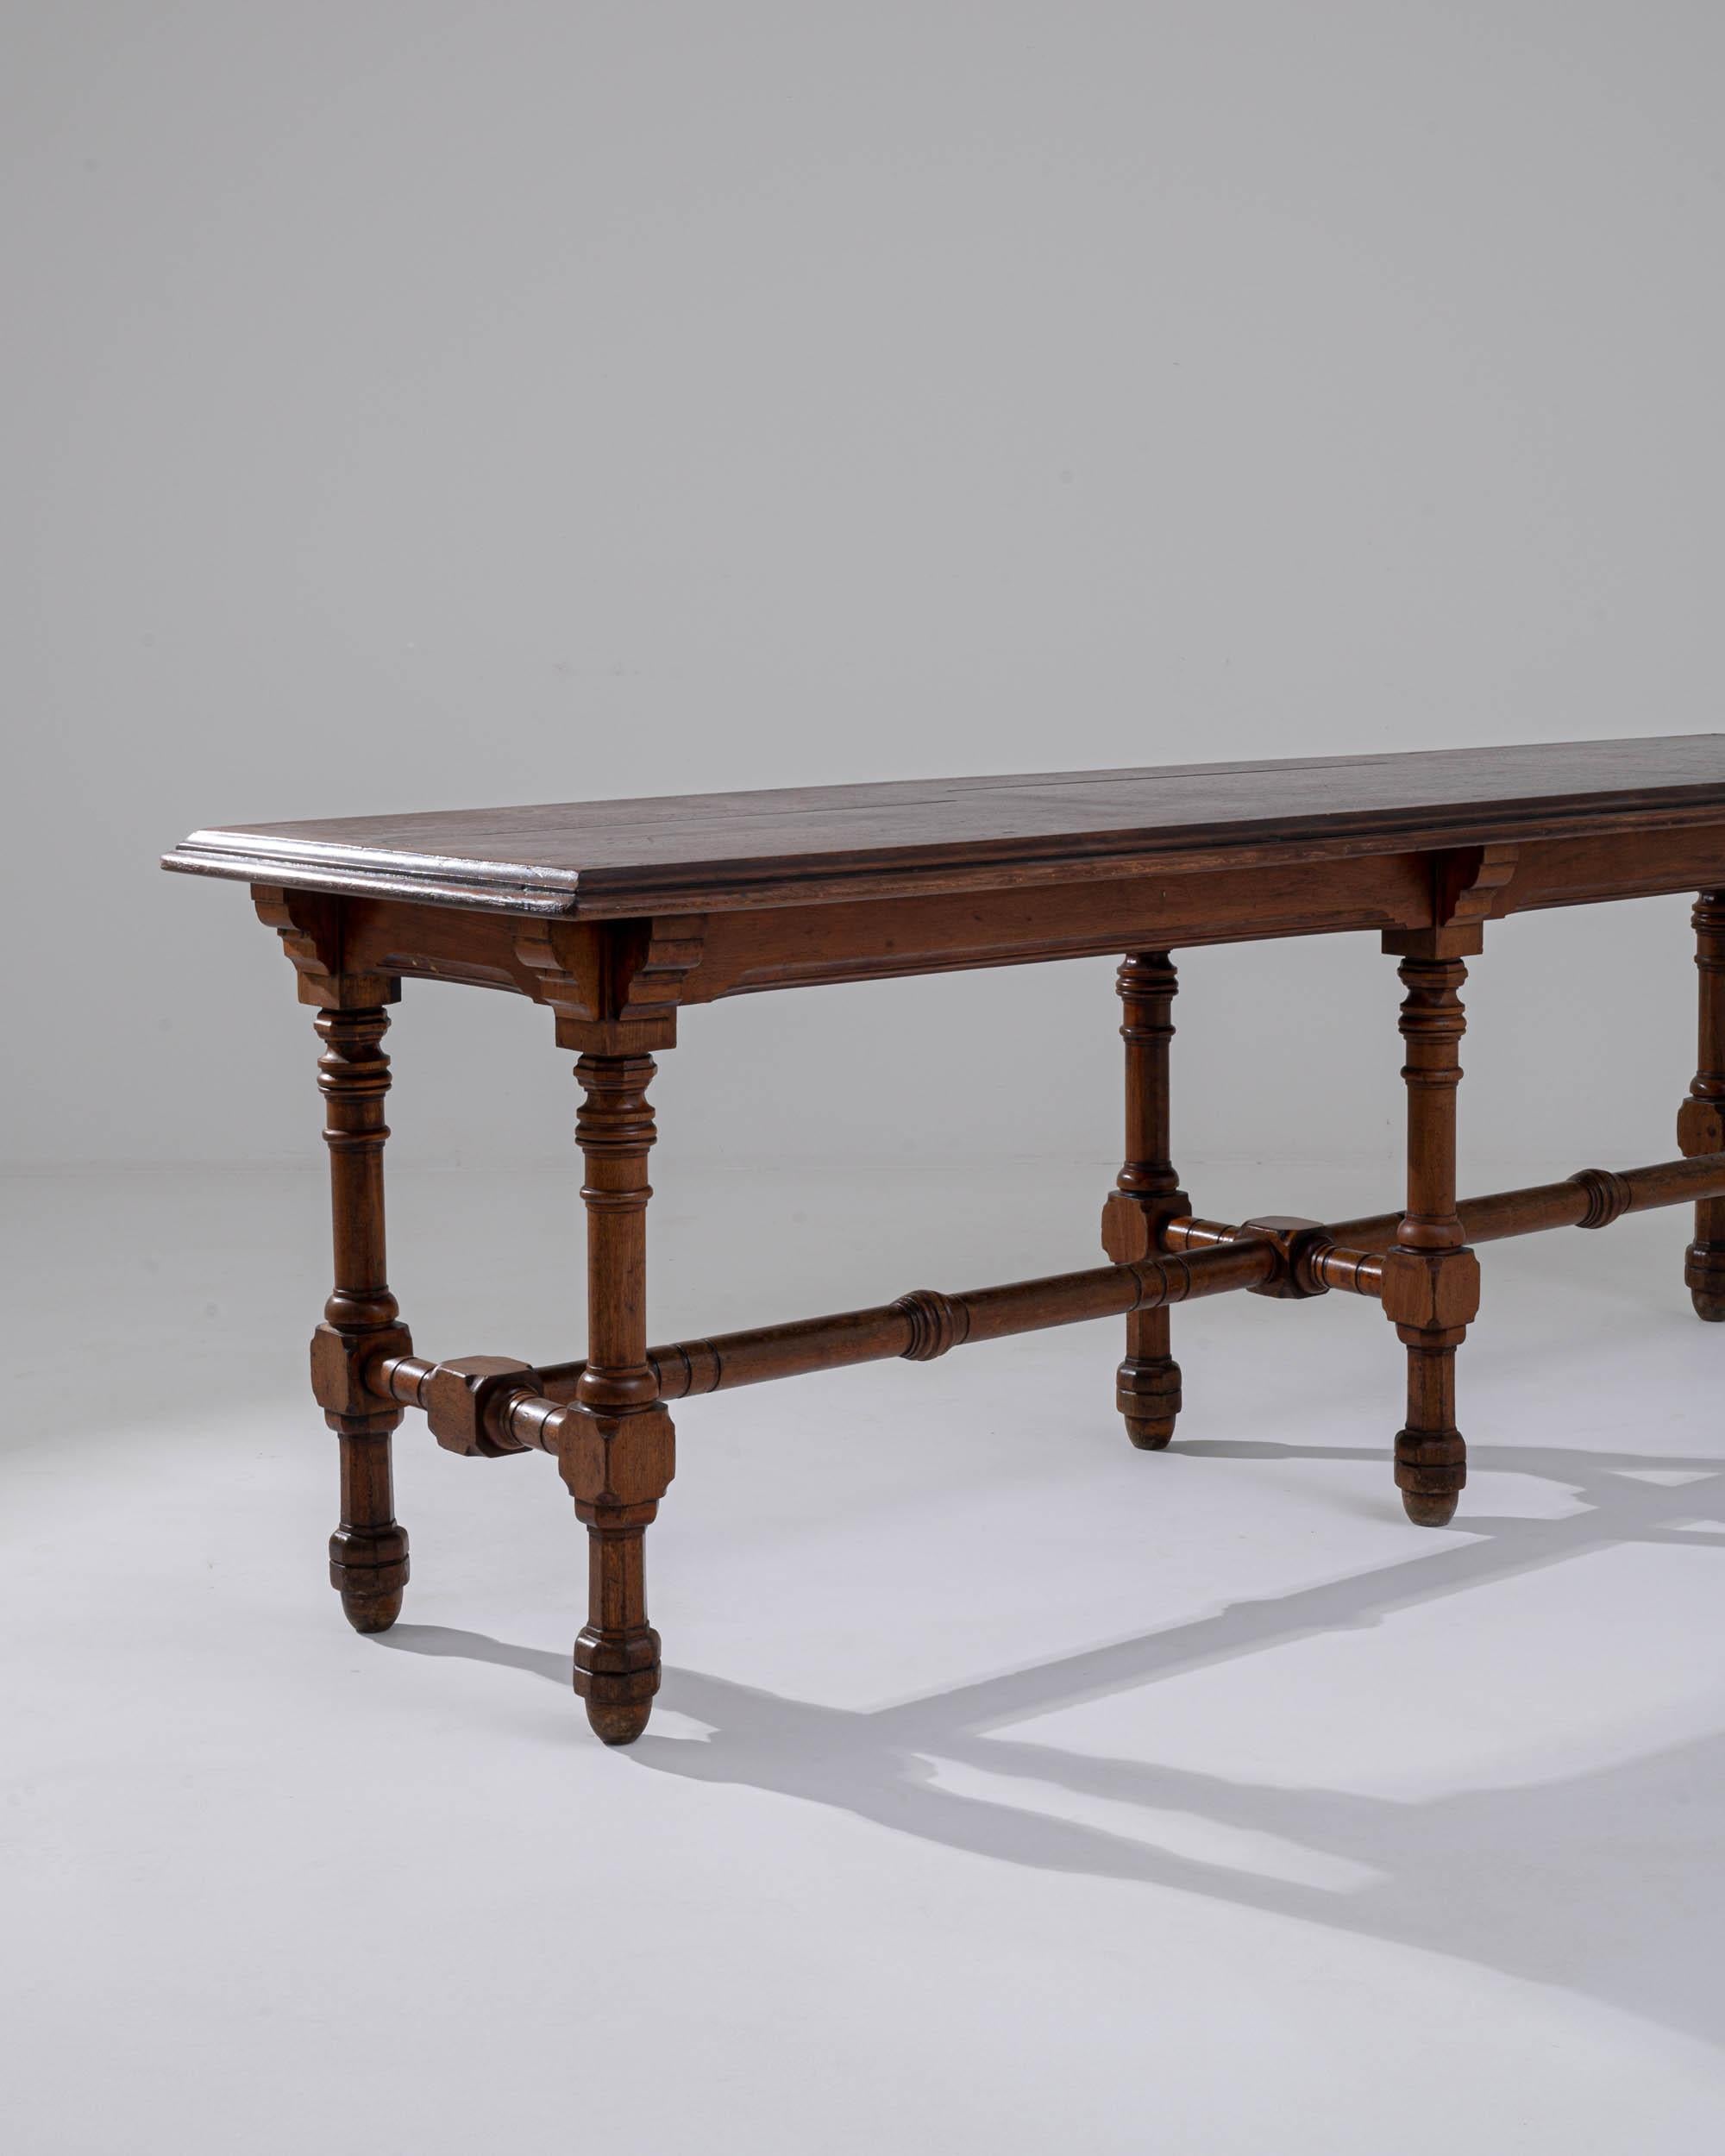 Hardwood Turn of the Century British Wooden Console Table